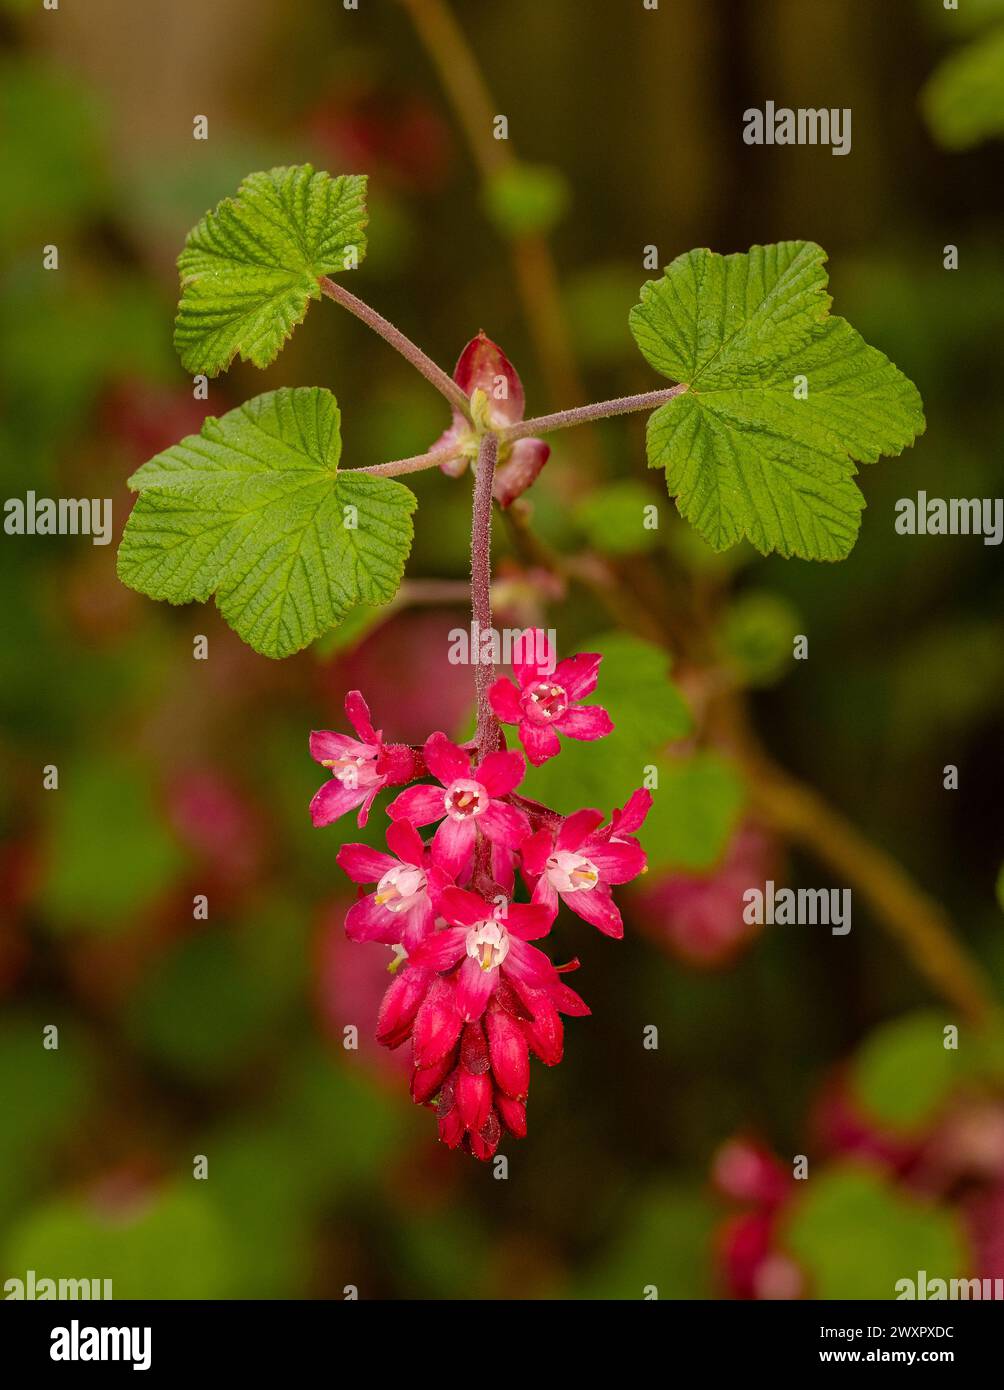 Ribes flower in Spring Stock Photo